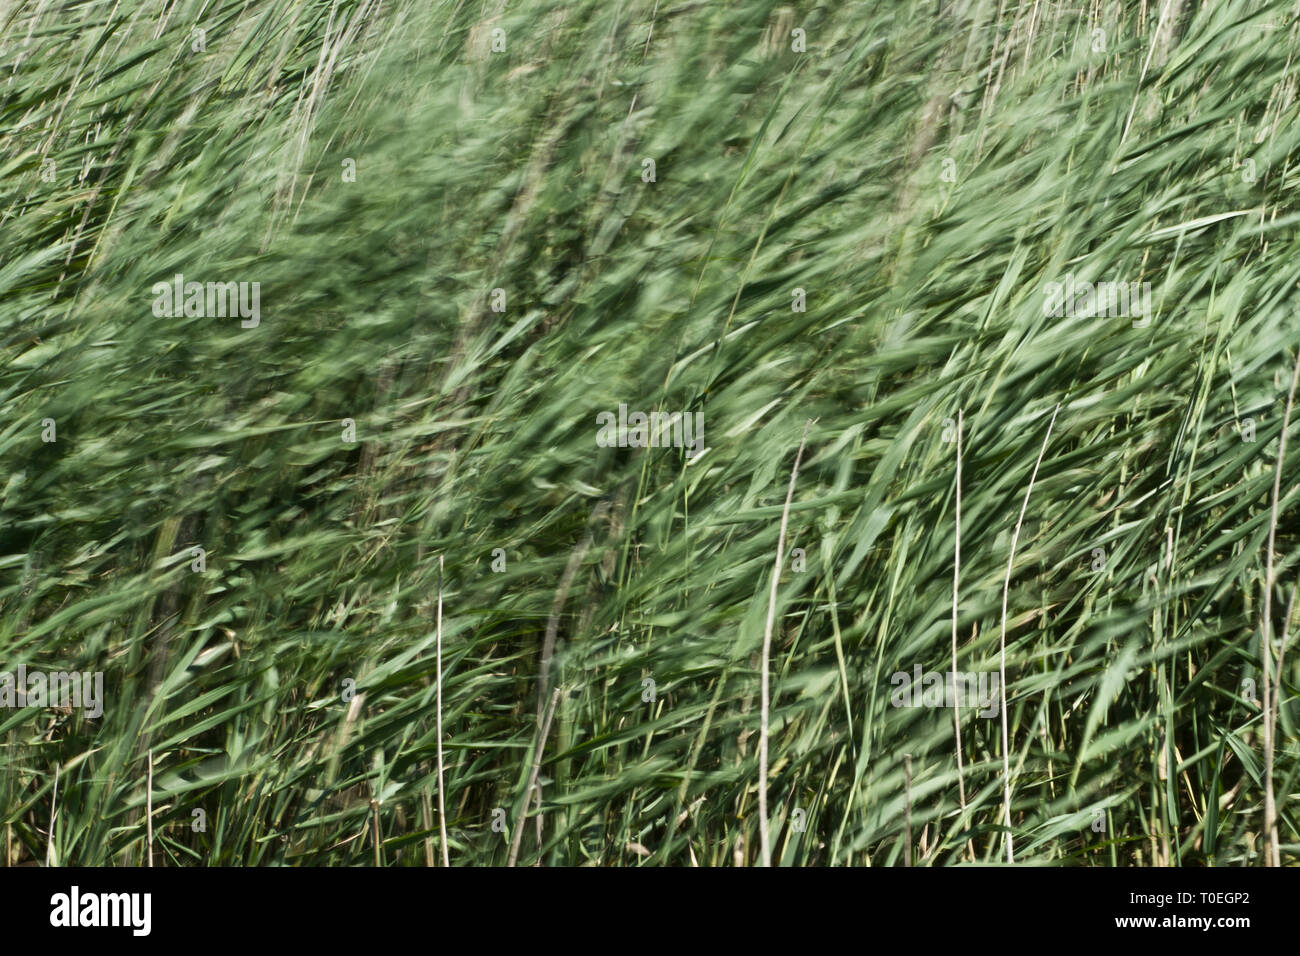 Abstract view of reeds blowing in the wind, Westhay Moor SWT reserve, Somerset Levels, Somerset, England, UK Stock Photo